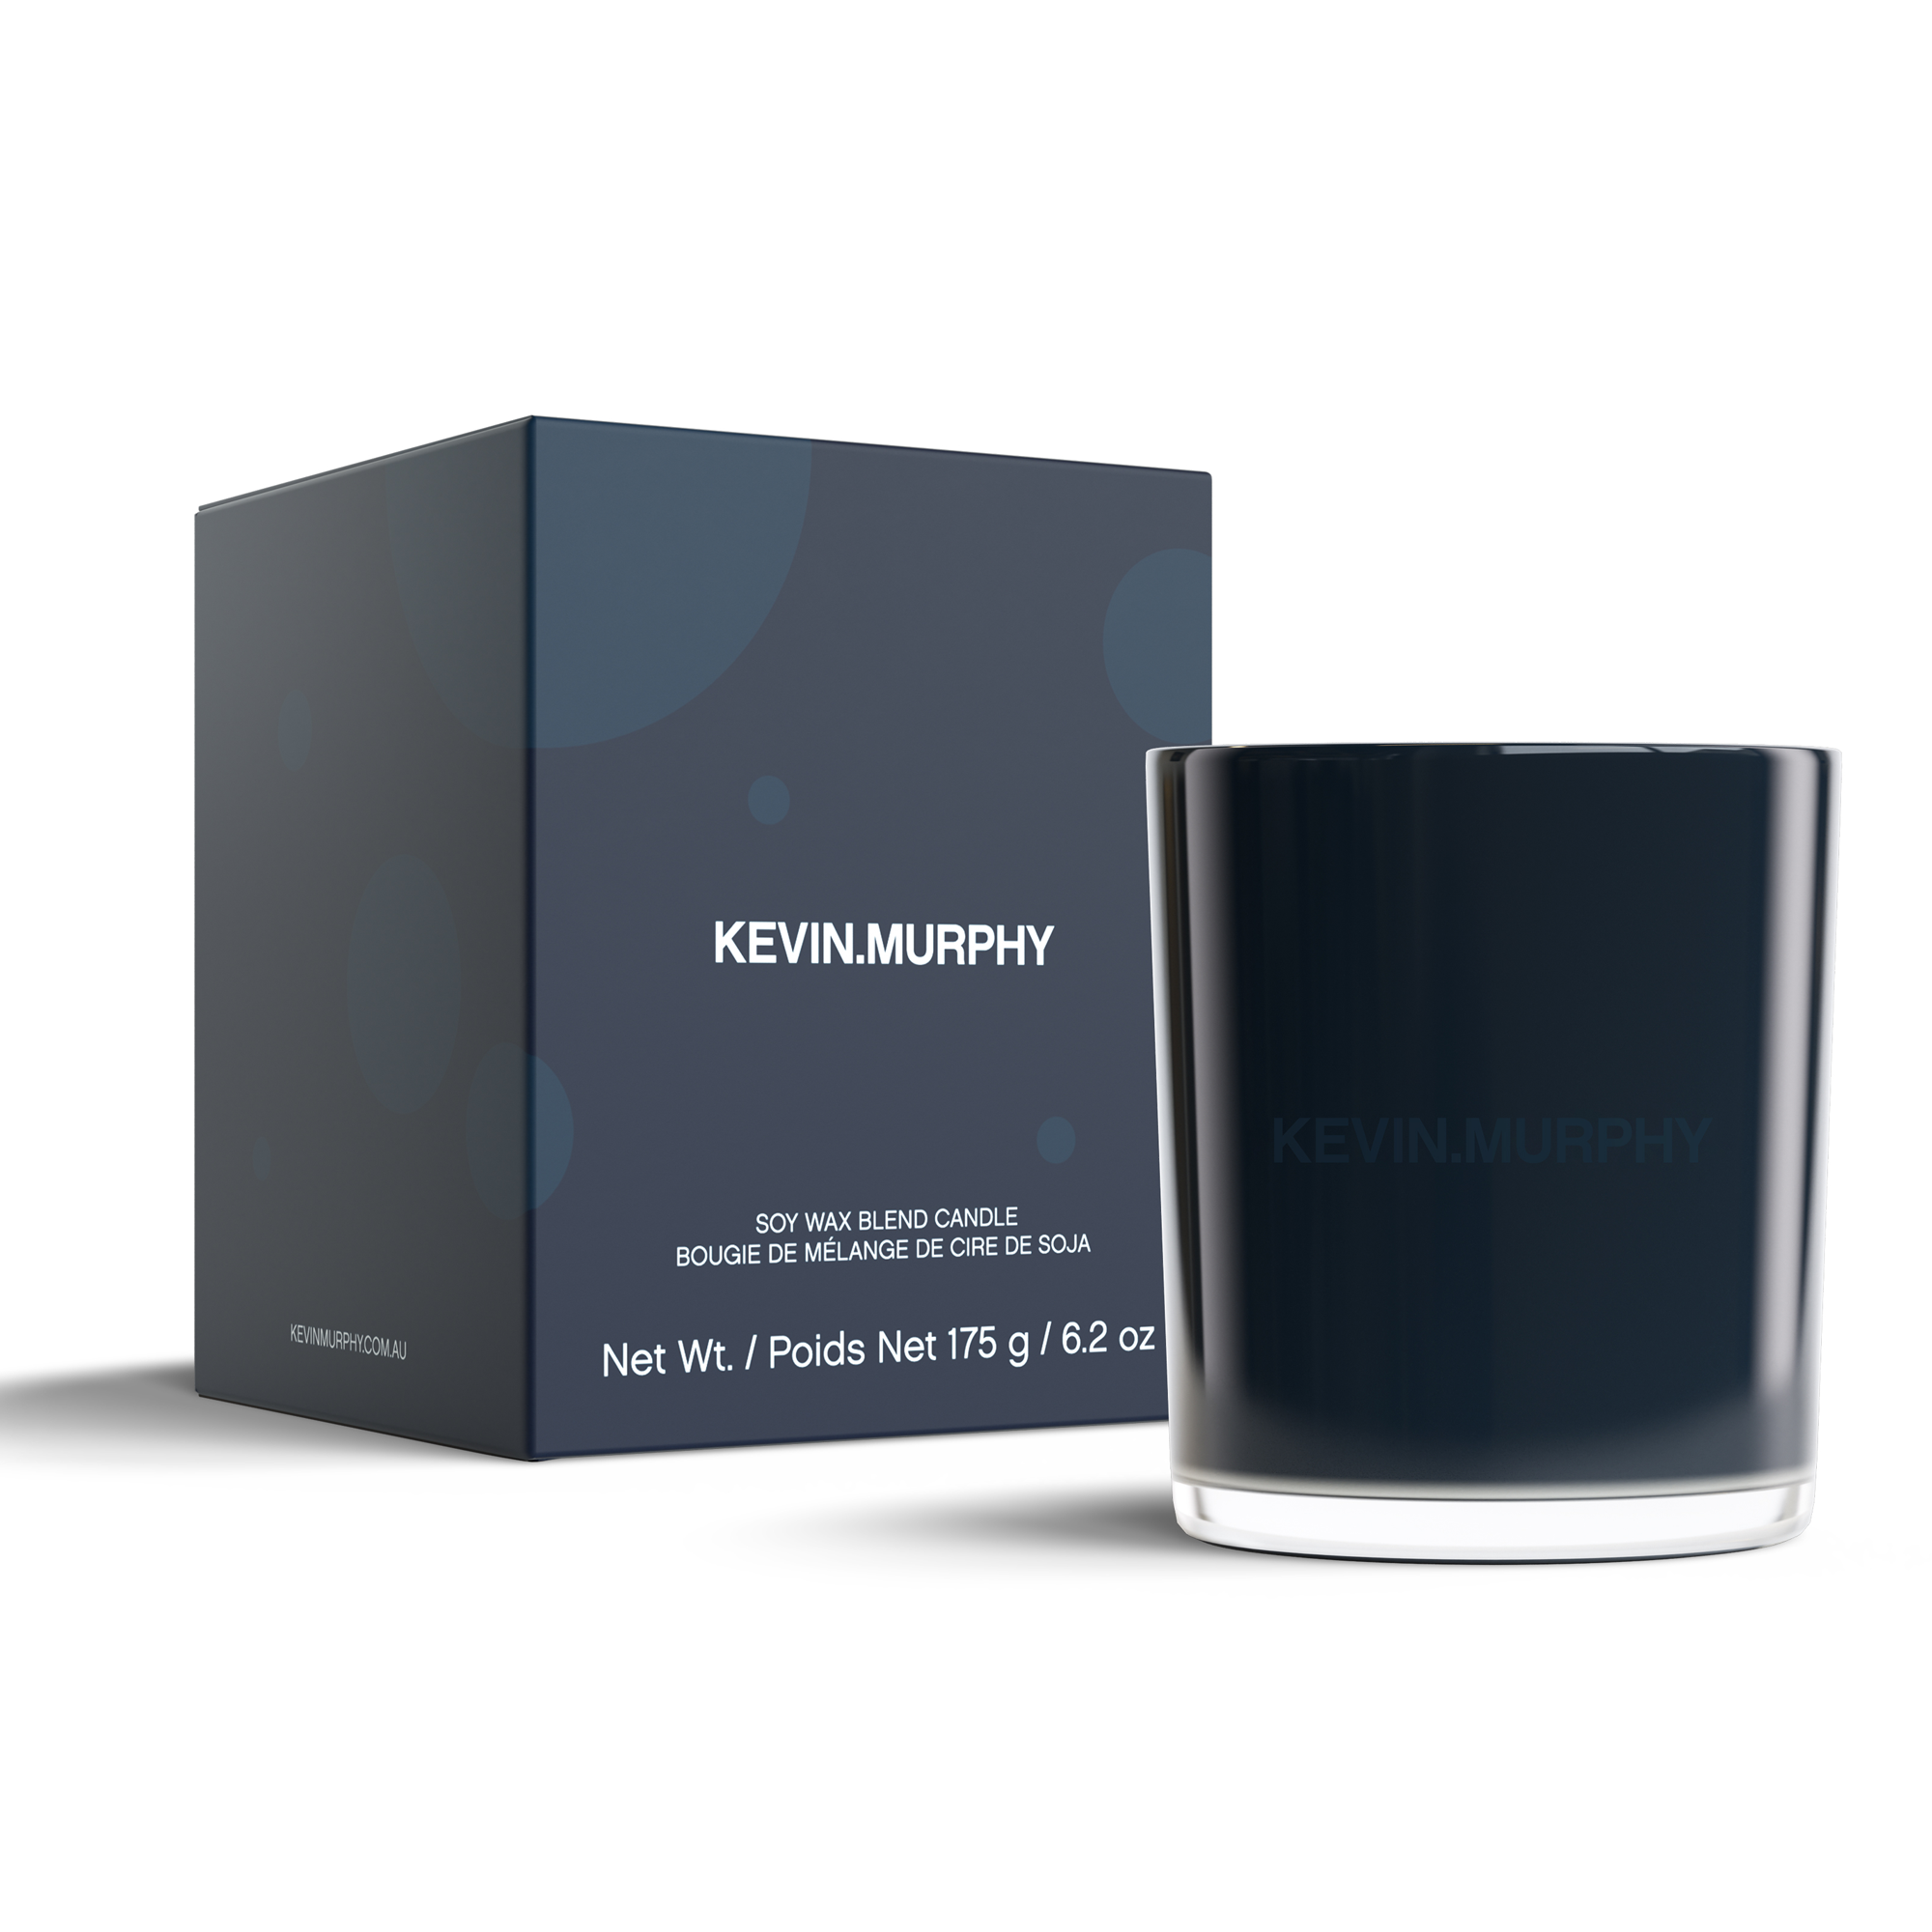 KEVIN.MURPHY Limited Edition Holiday Candle Infused with Cedarwood Patchouli